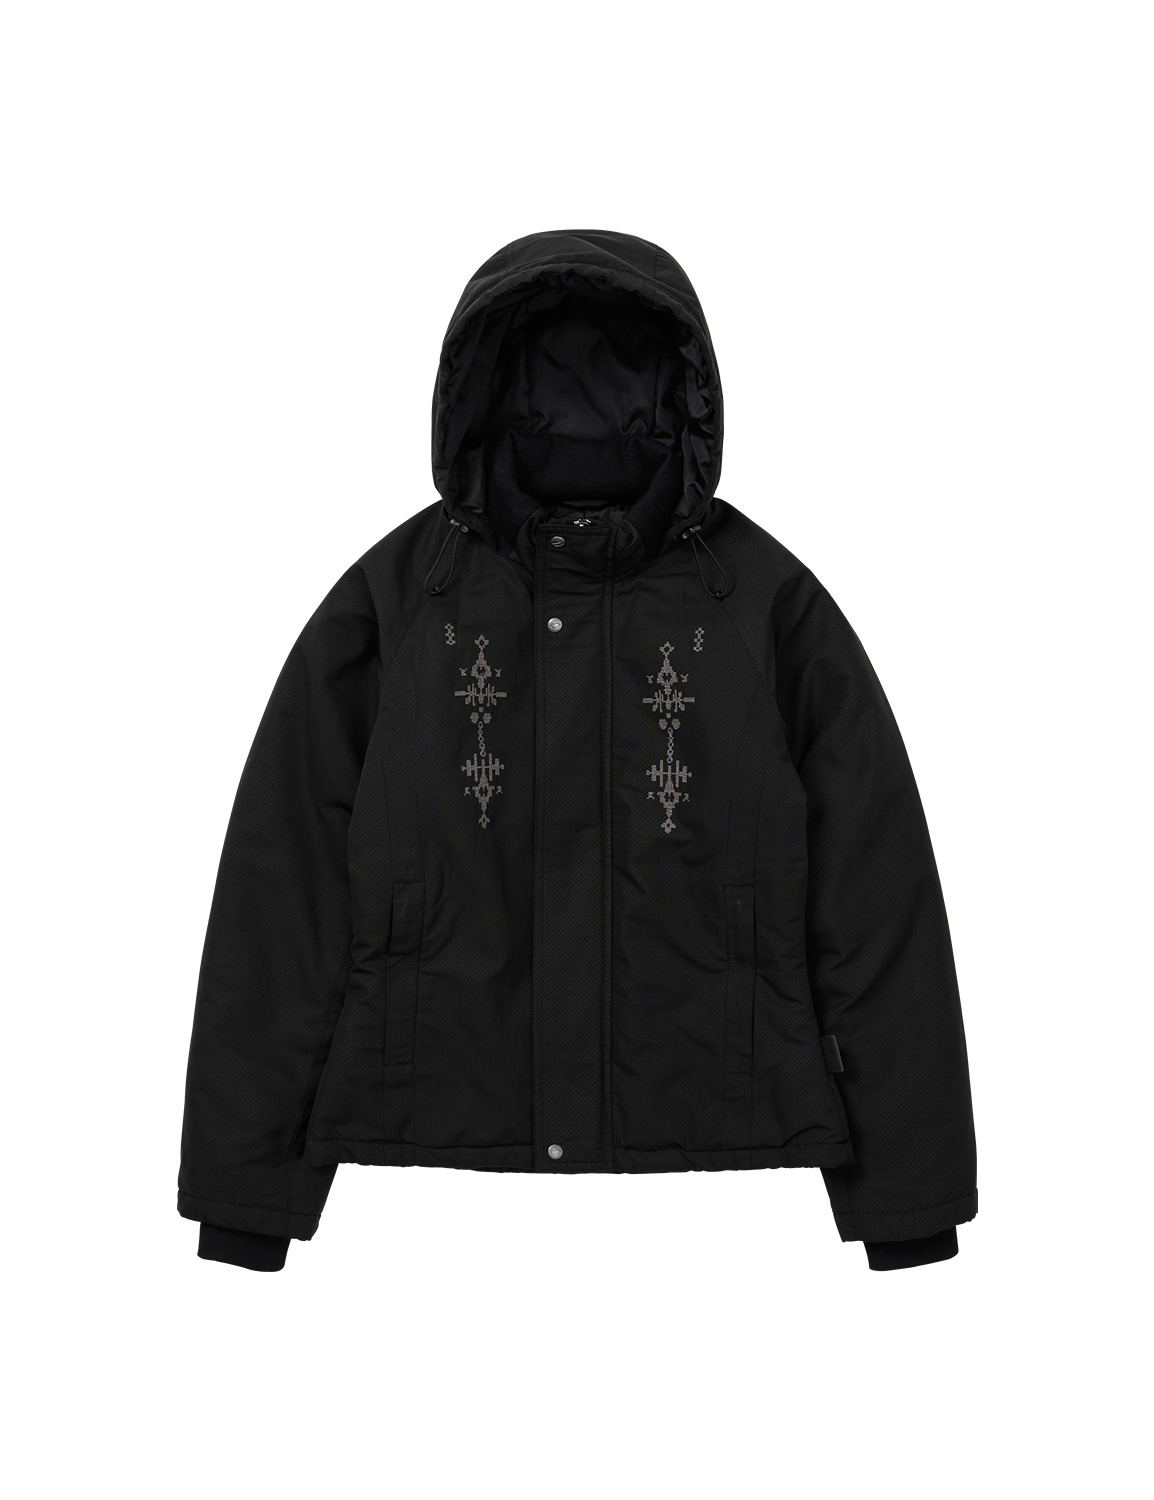 Embroidered Field Parka Black - WELLBEING EXPRESS